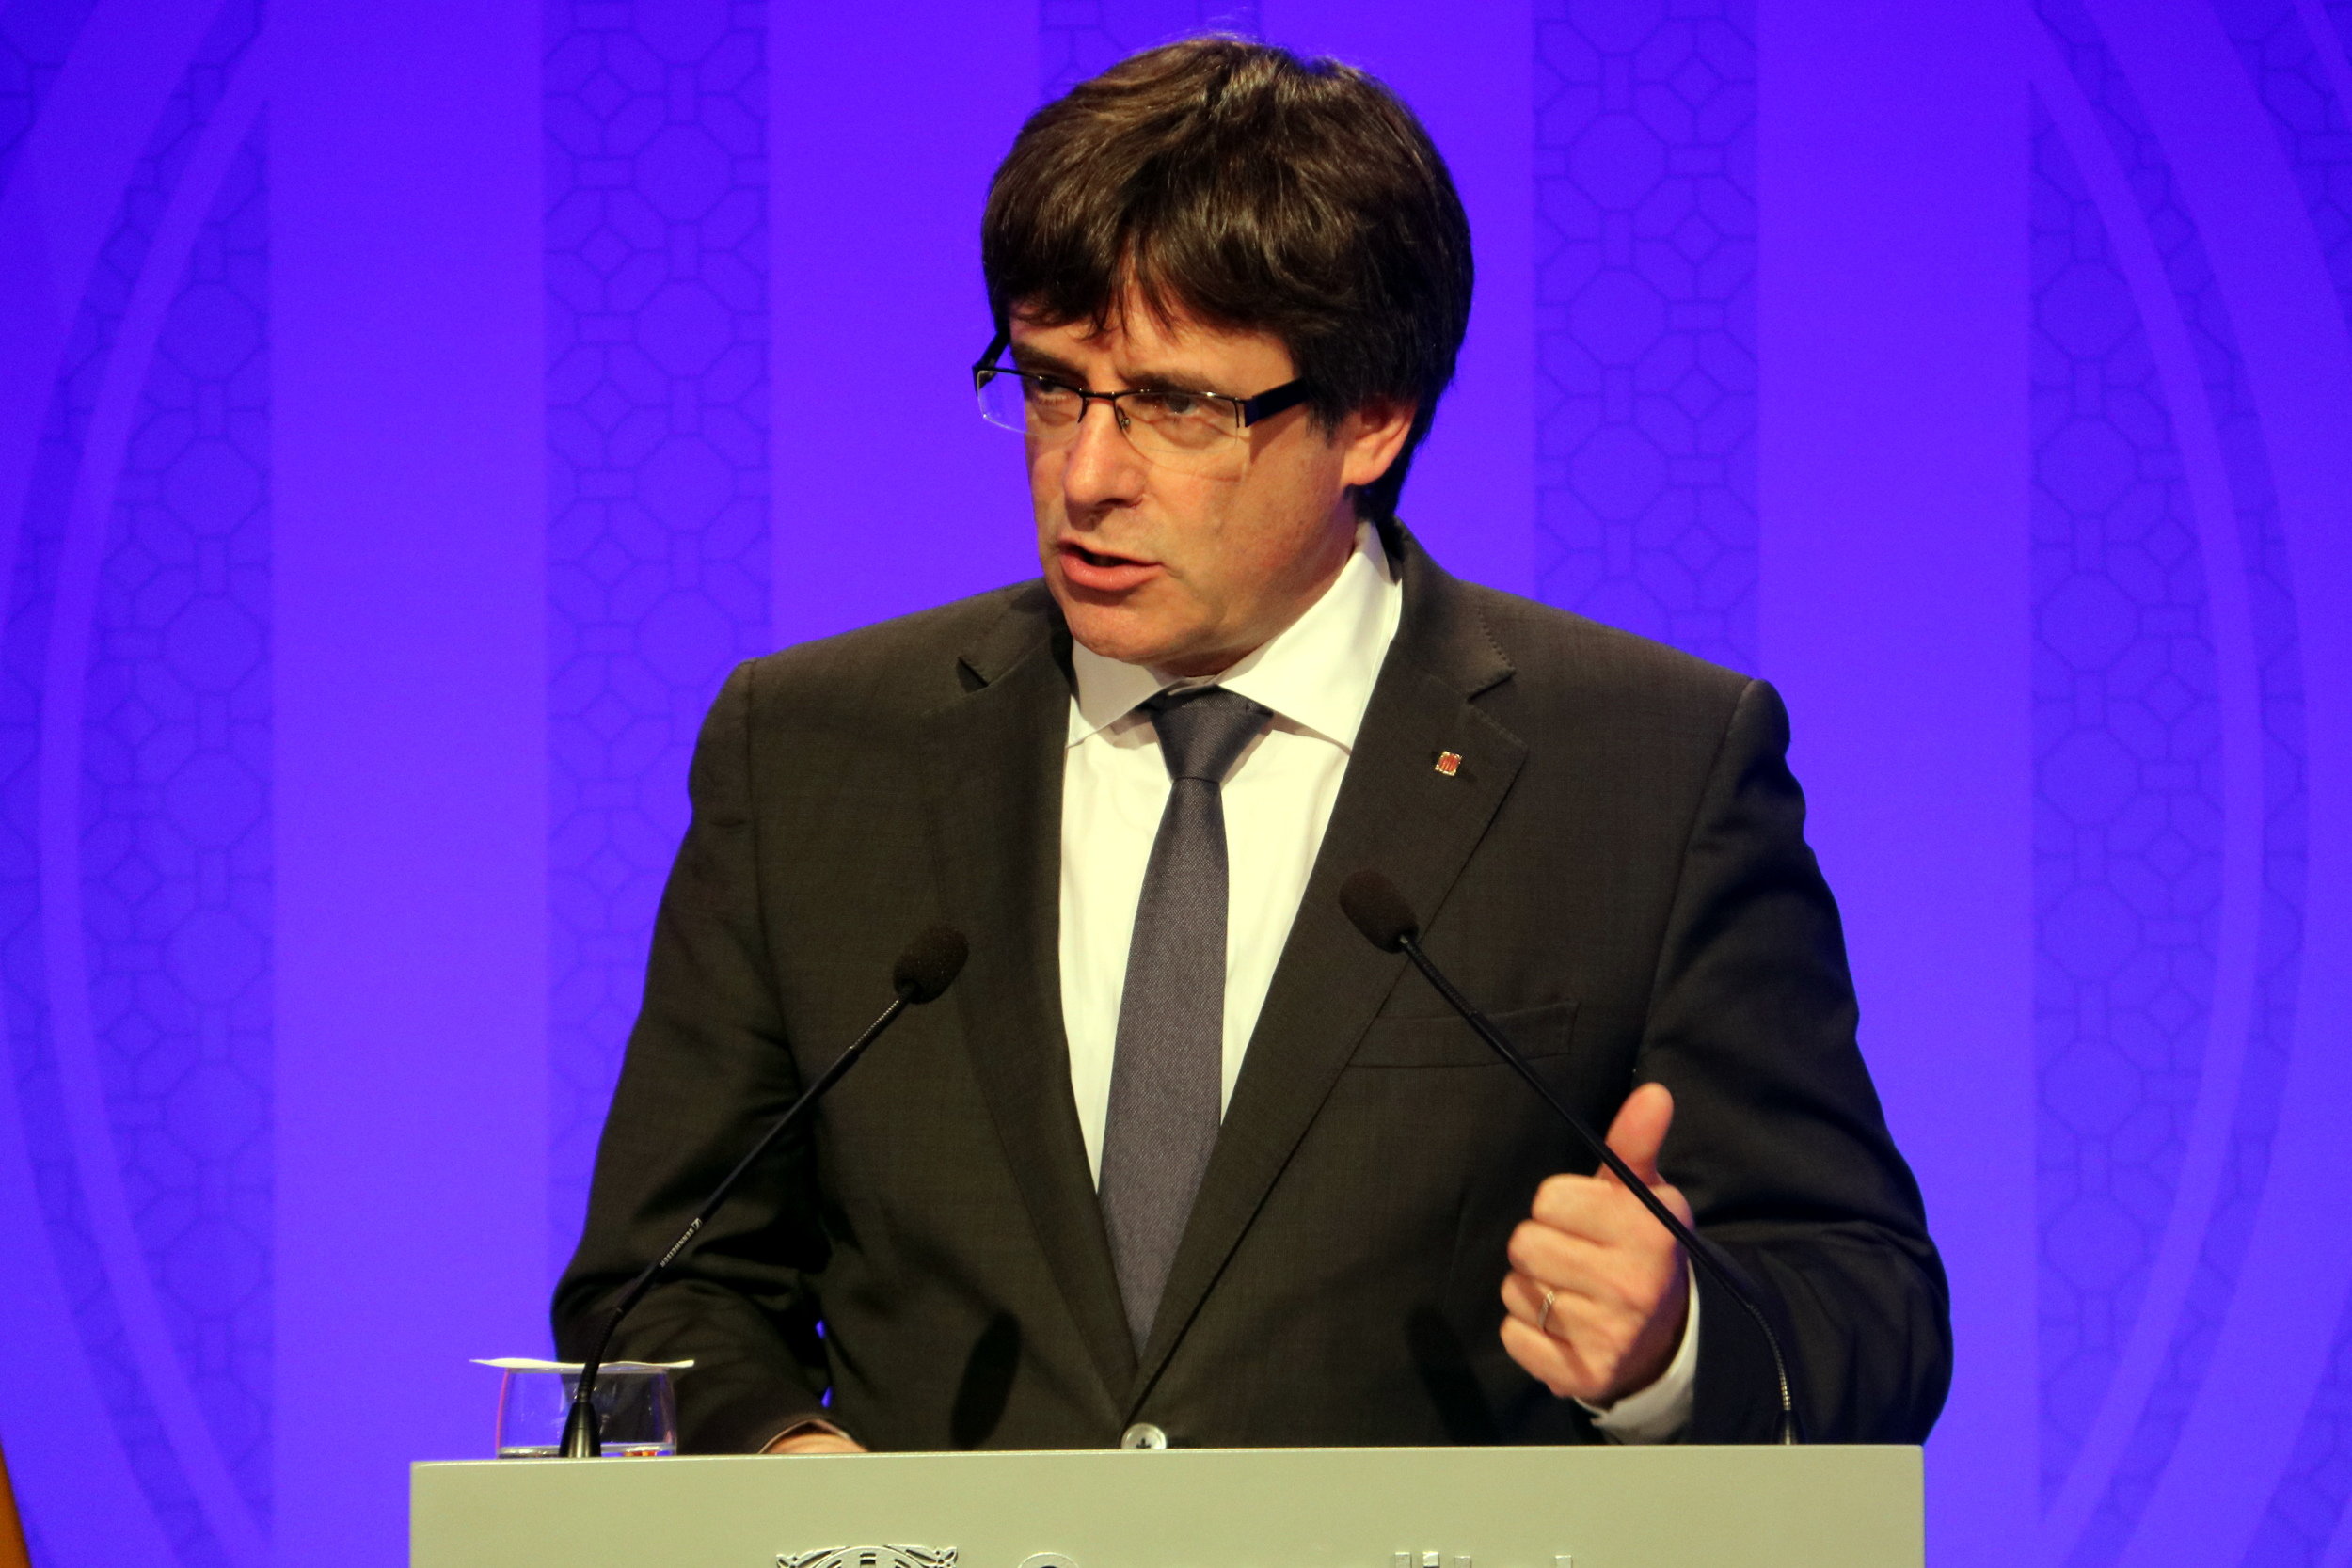 The Catalan president, Carles Puigdemont, during his press conference this Monday